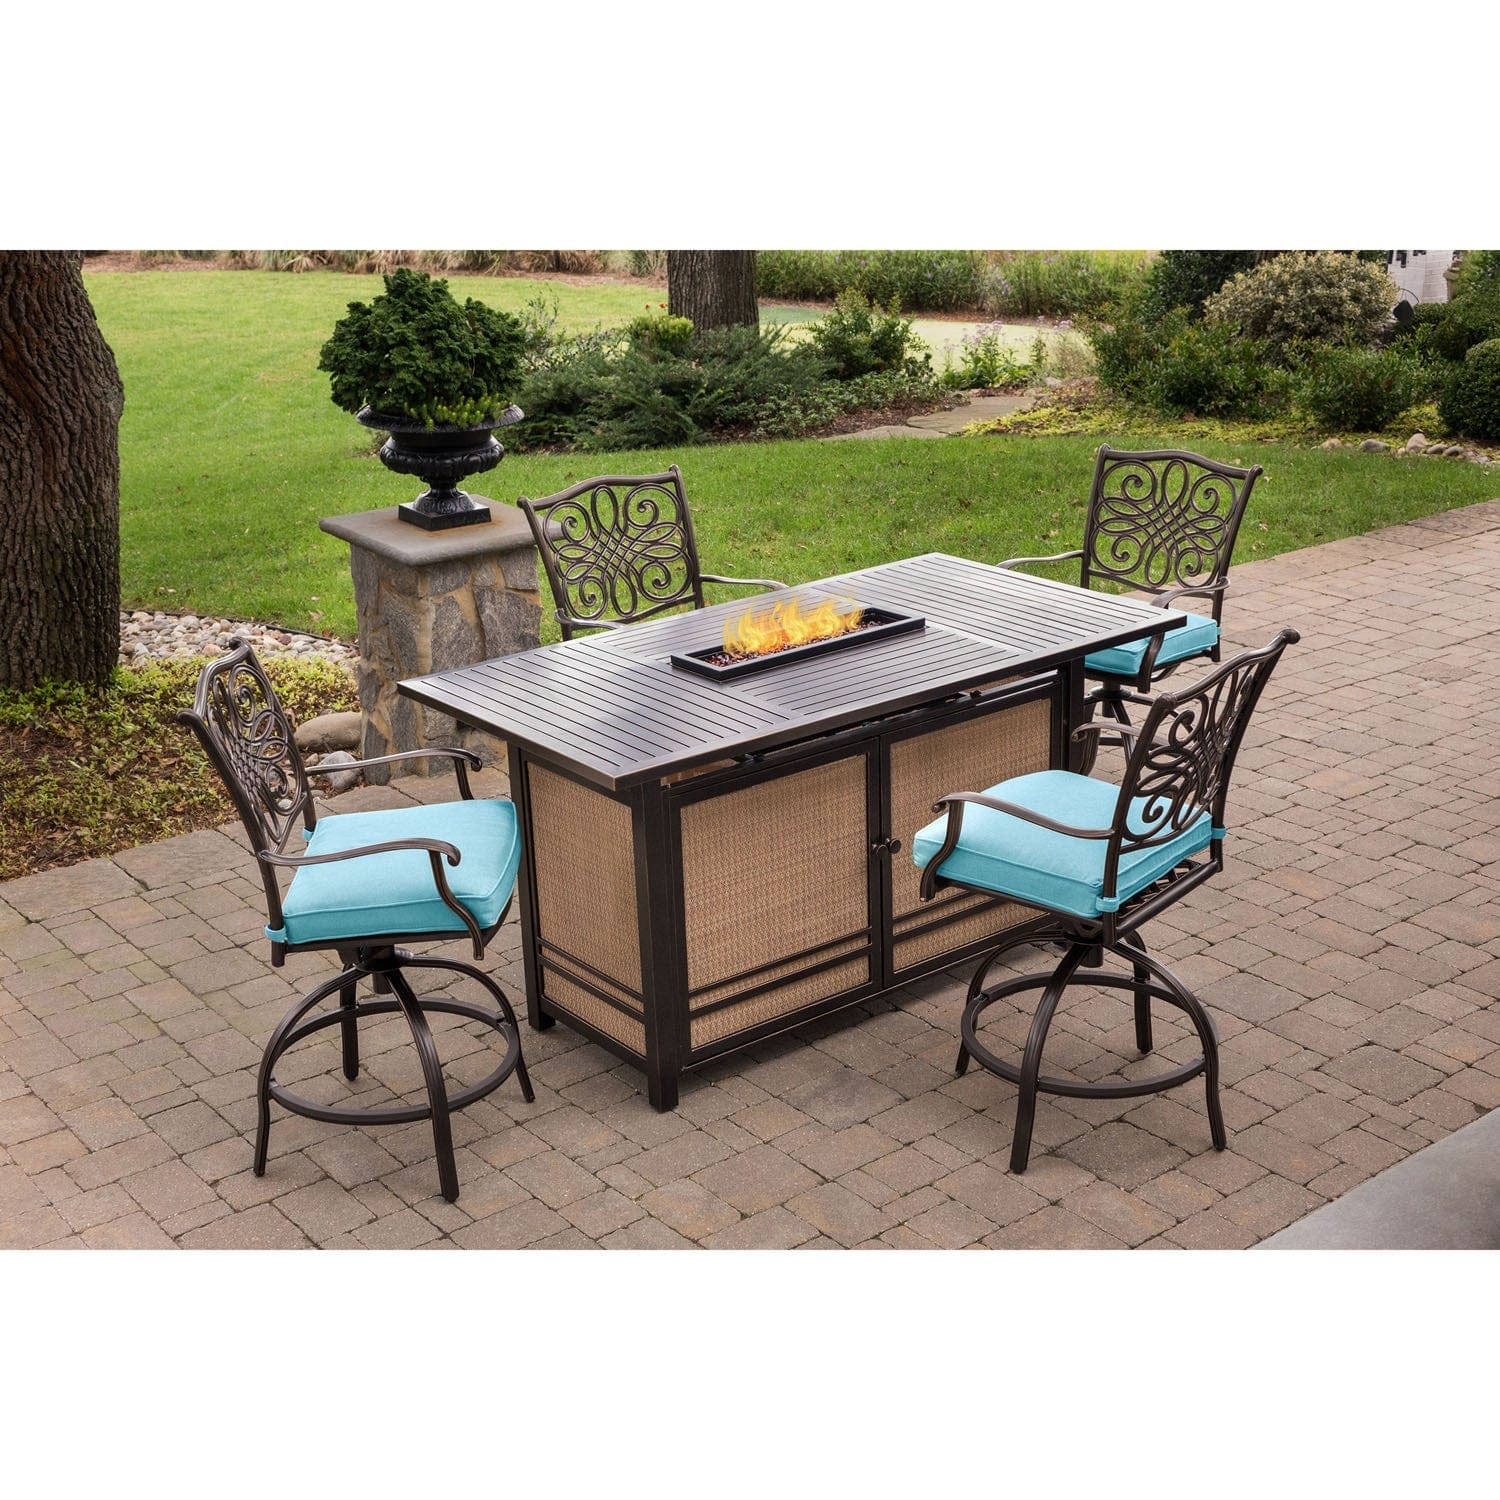 Hanover Fire Pit Dining Set Hanover Traditions 5-Piece Aluminum Frame High-Dining Set in Blue with 4 Swivel Chairs and a Fire Pit Dining Table | TRAD5PCFPBR-BLU